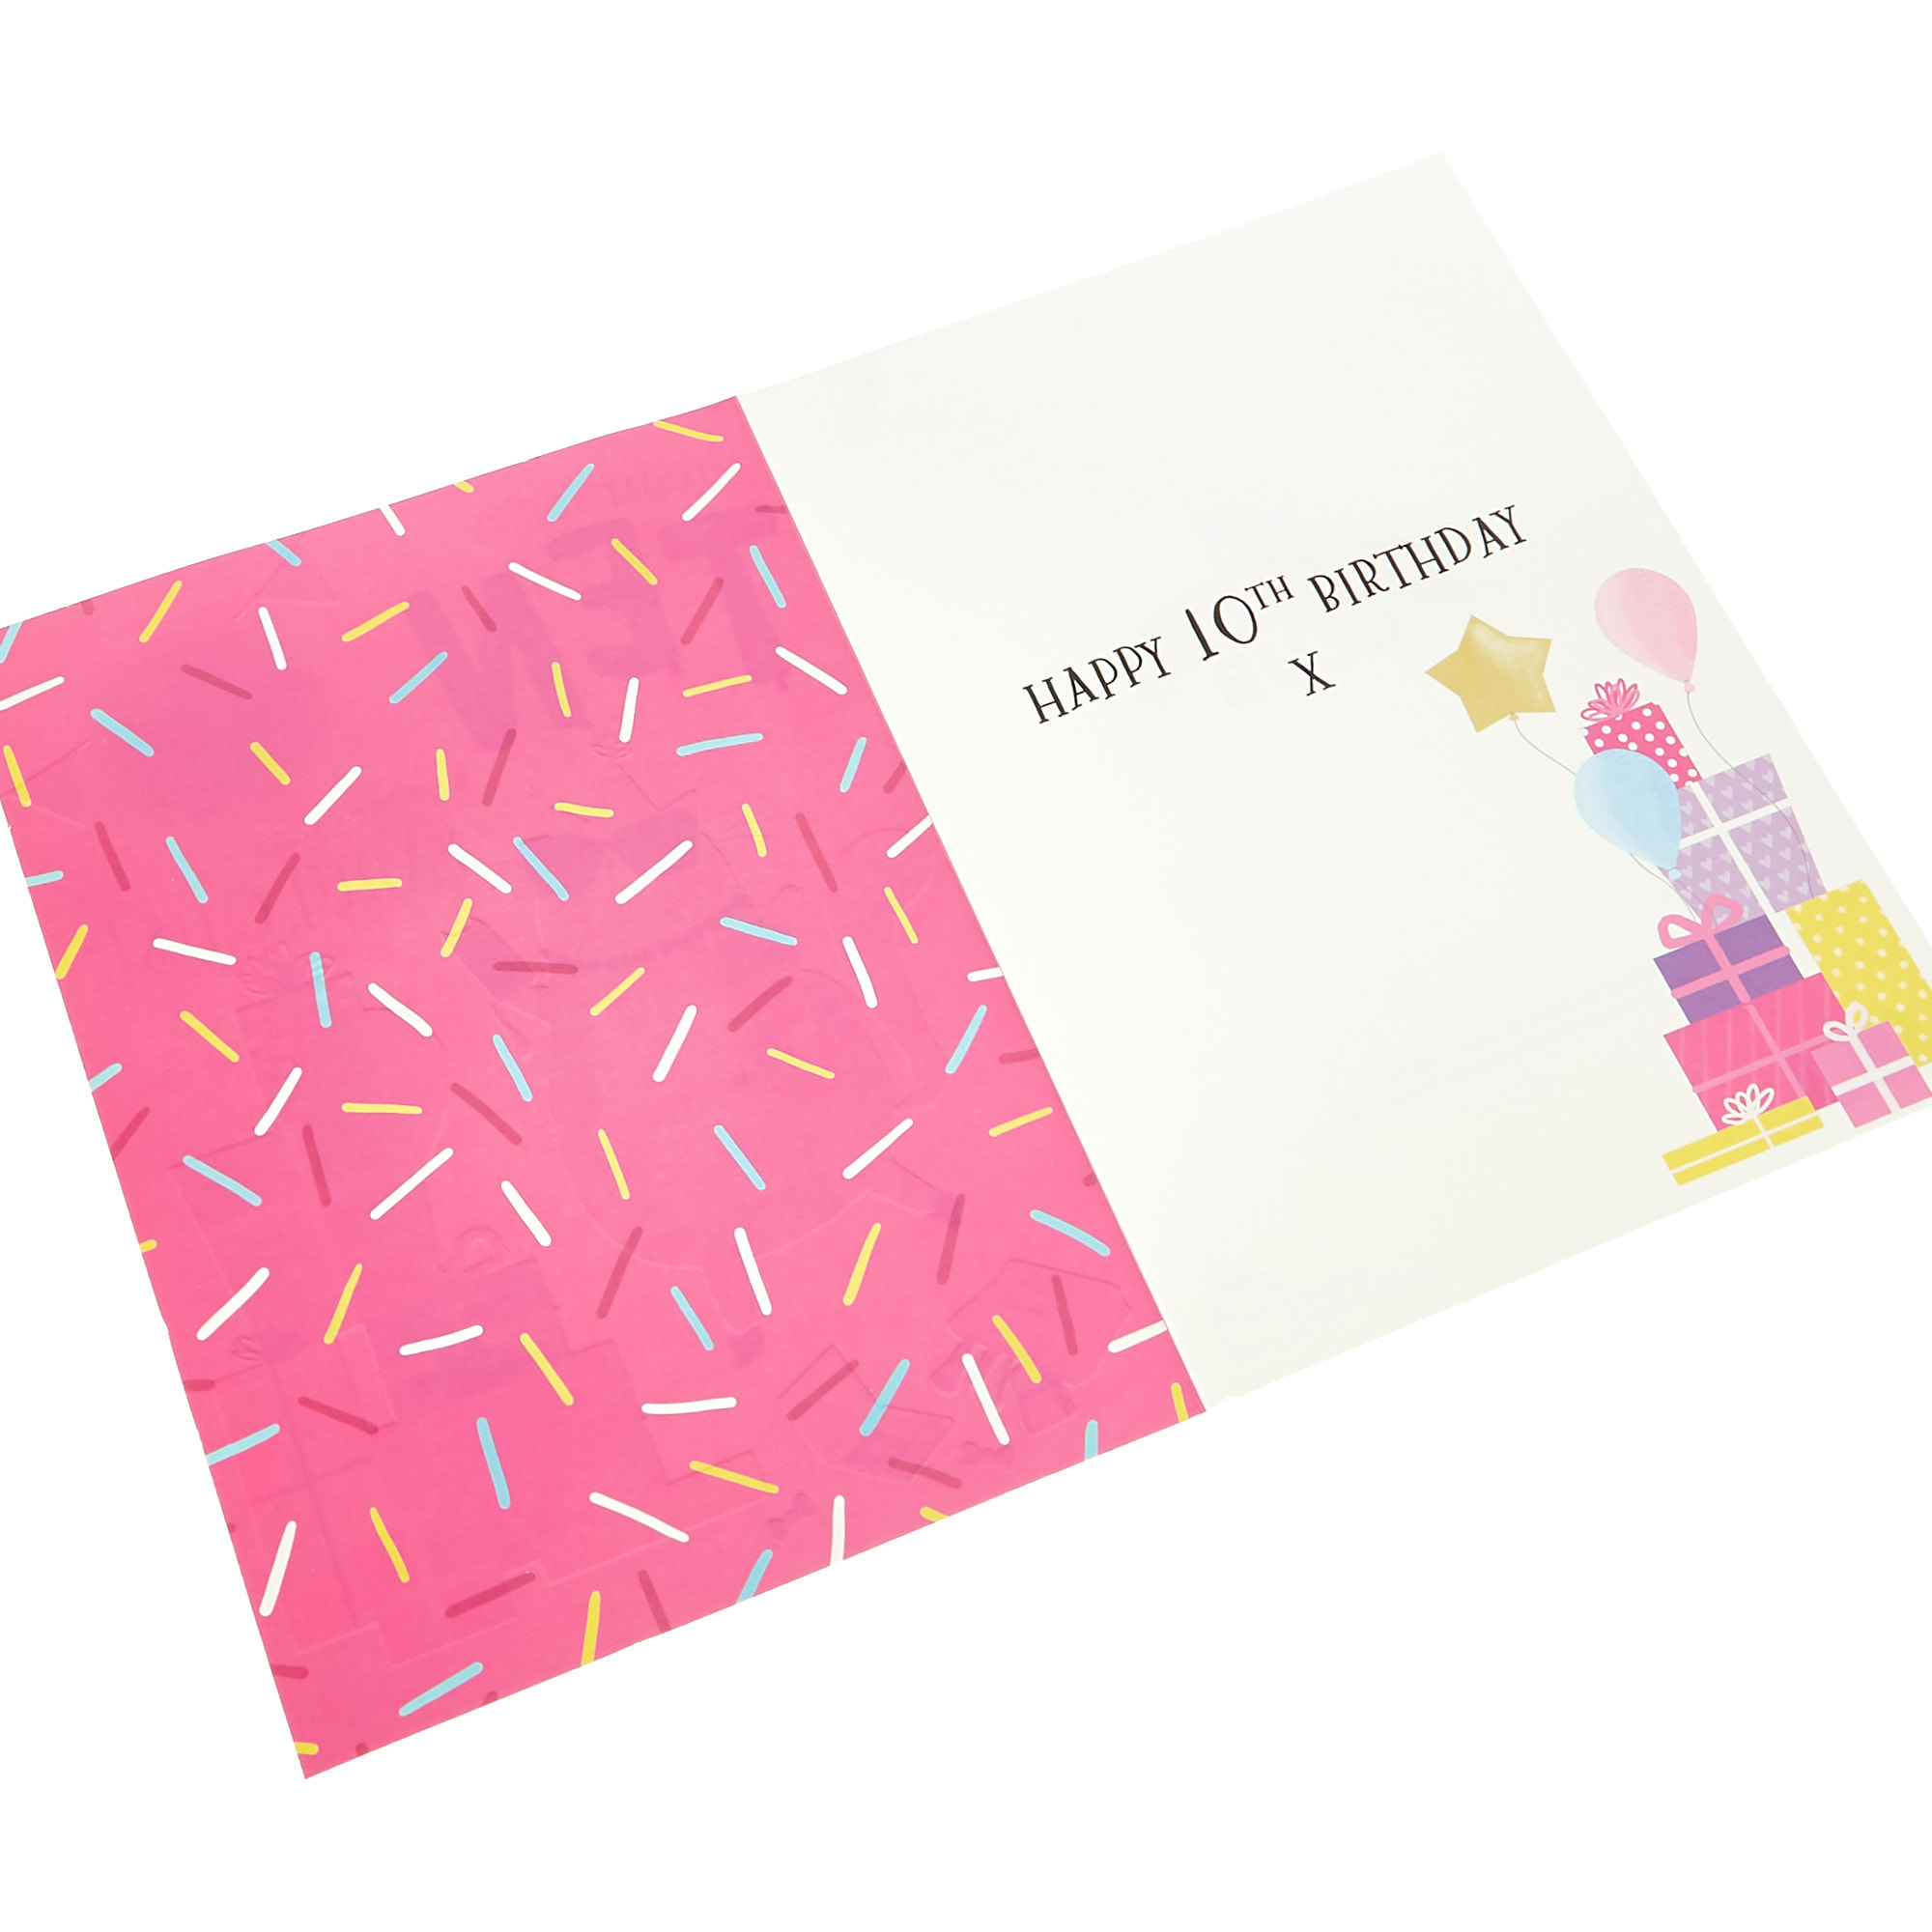 Buy 10th Birthday Card - Fab Cat (With Badge) for GBP 1.29 | Card ...